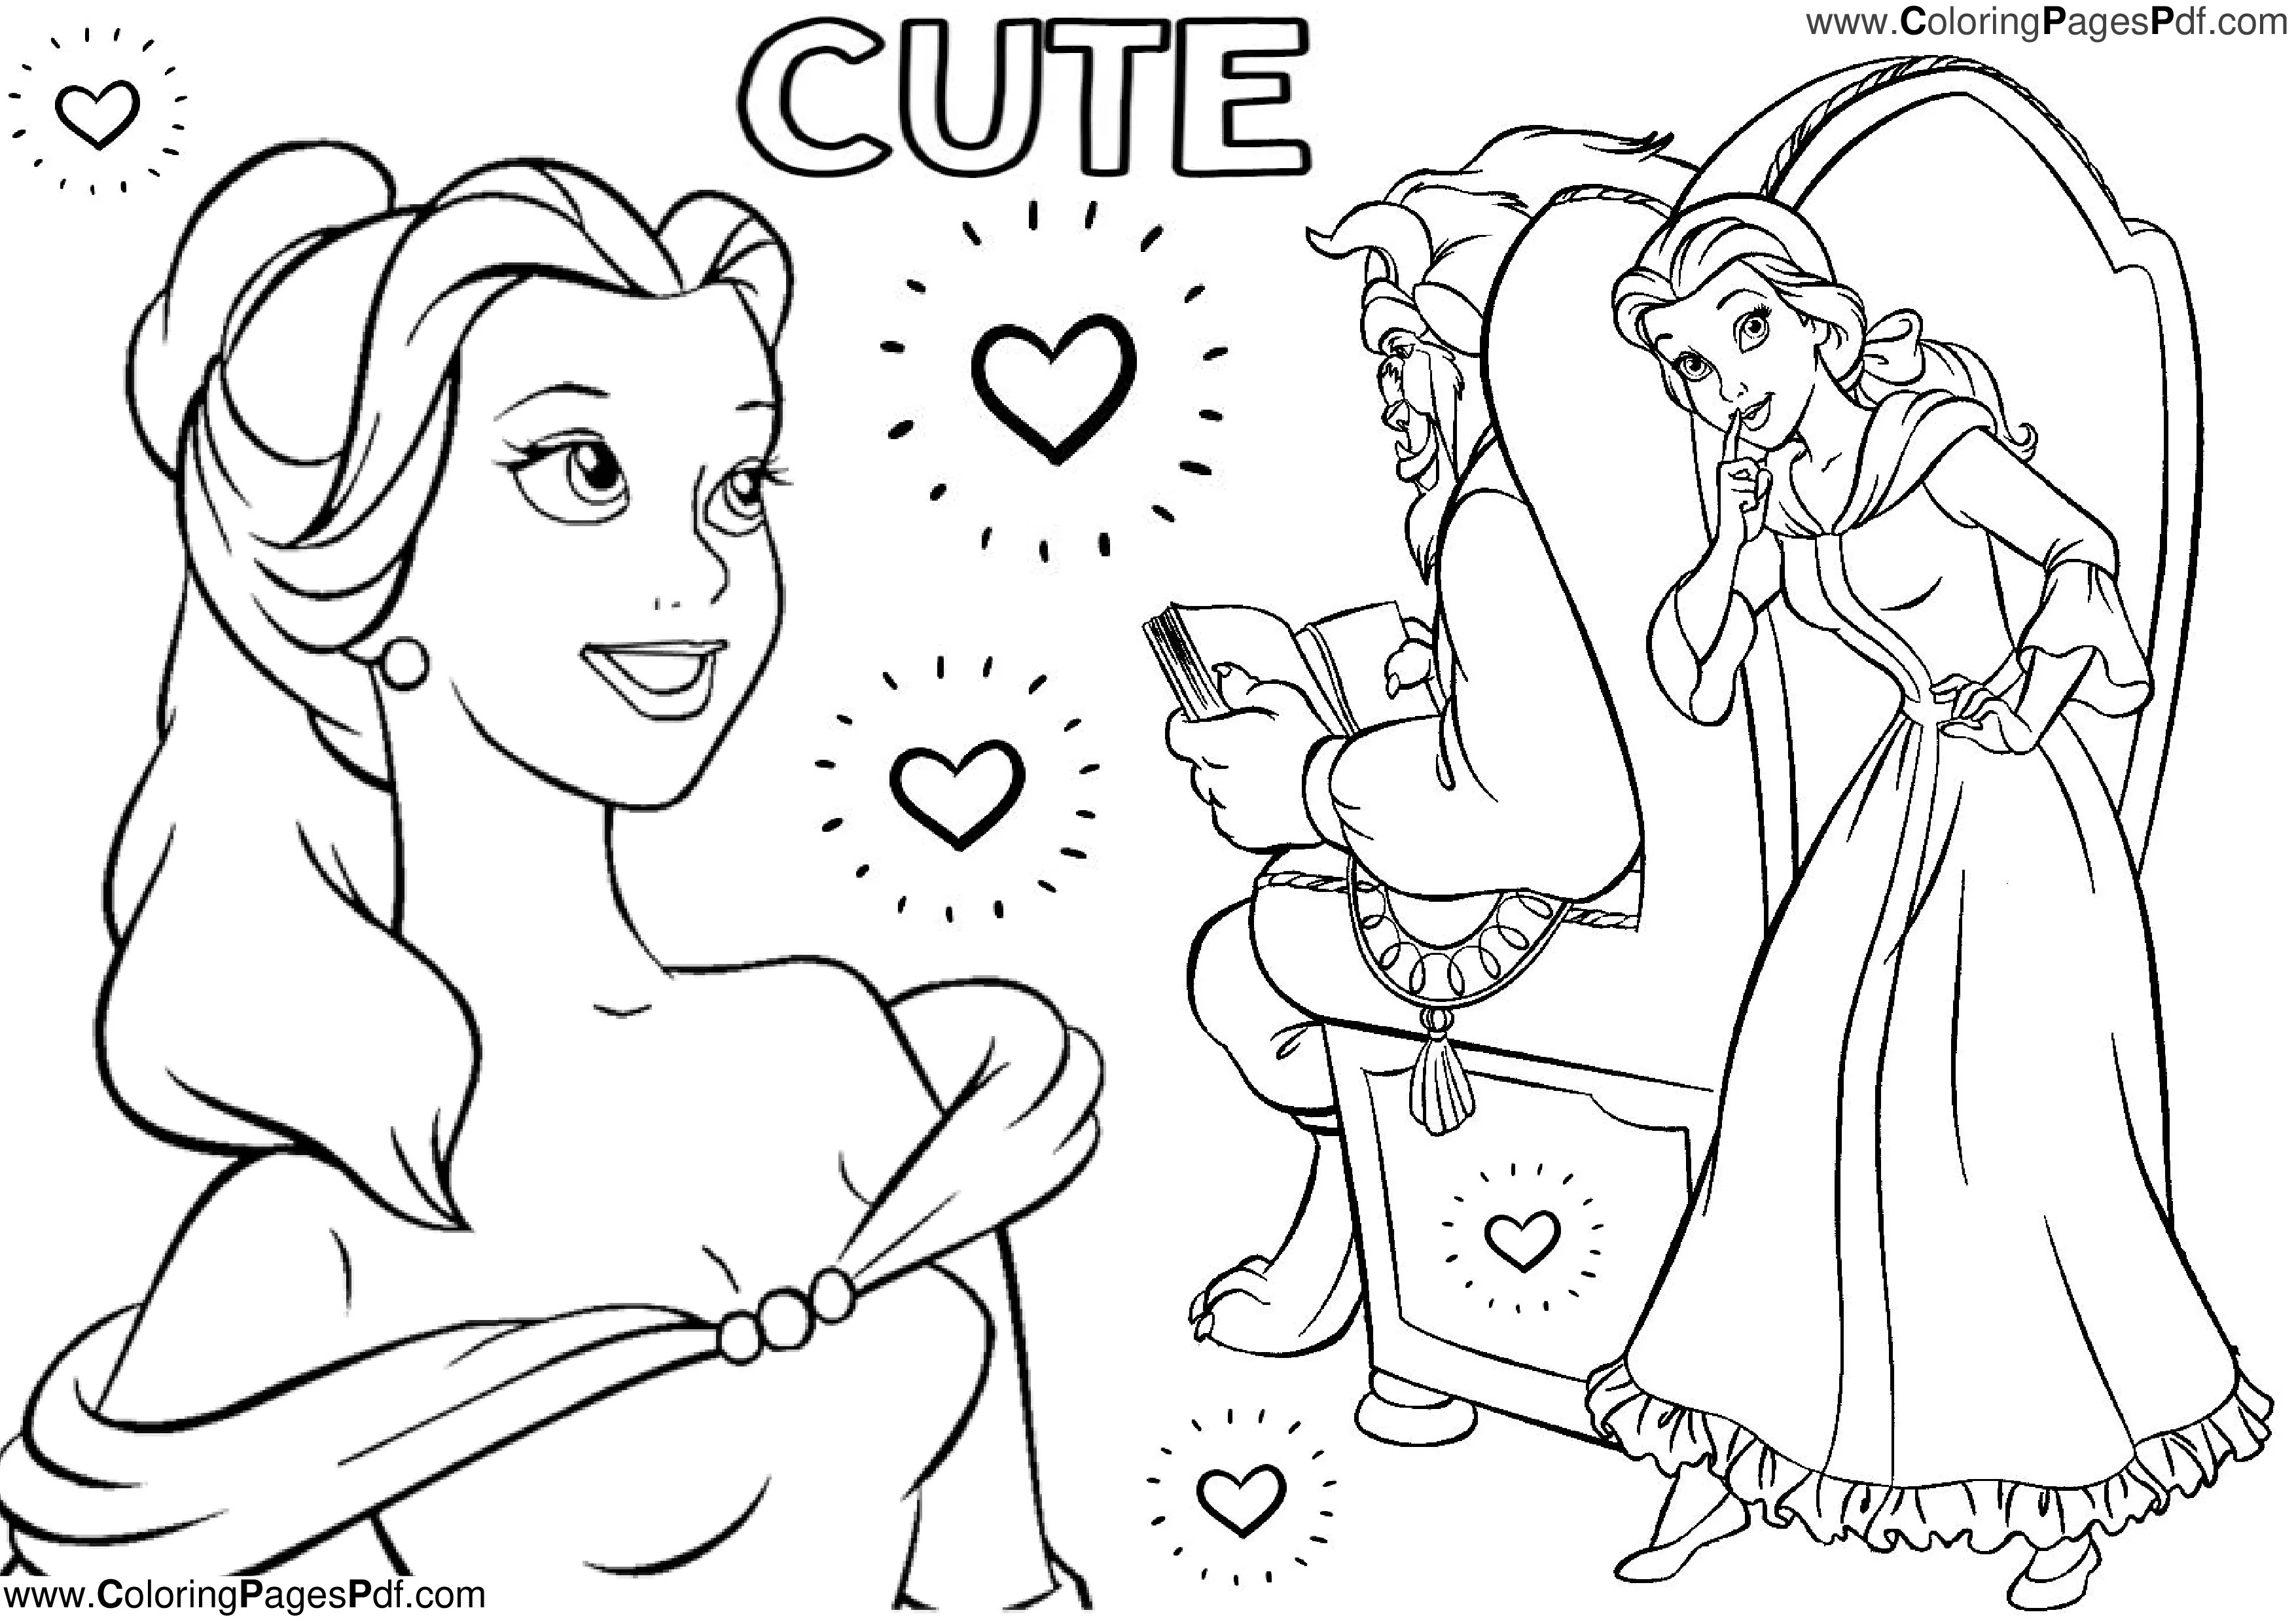 Beauty and the beast coloring pages for girls